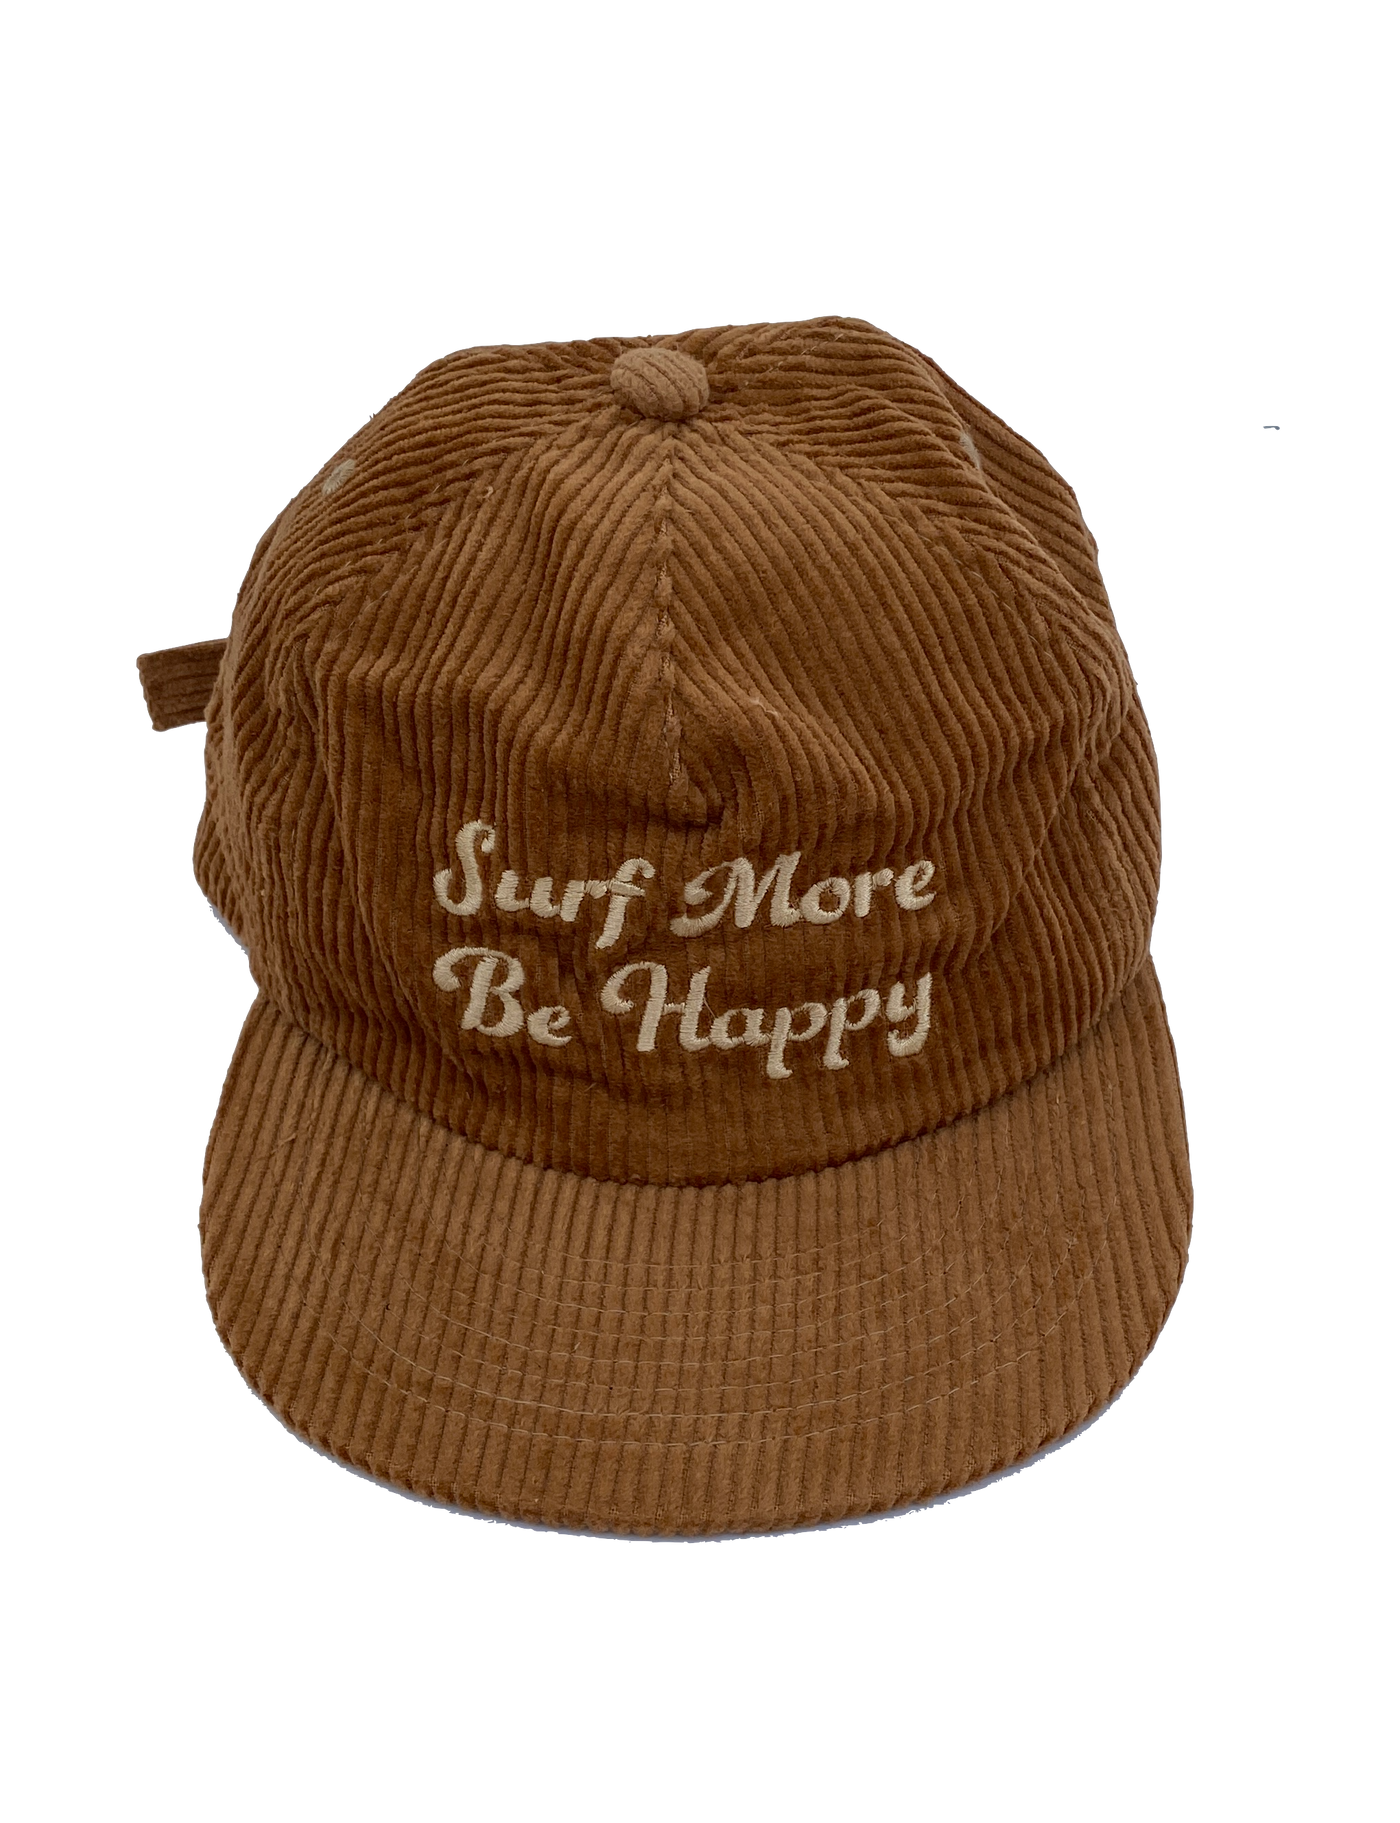 Surf More Be Happy Corduroy Hat